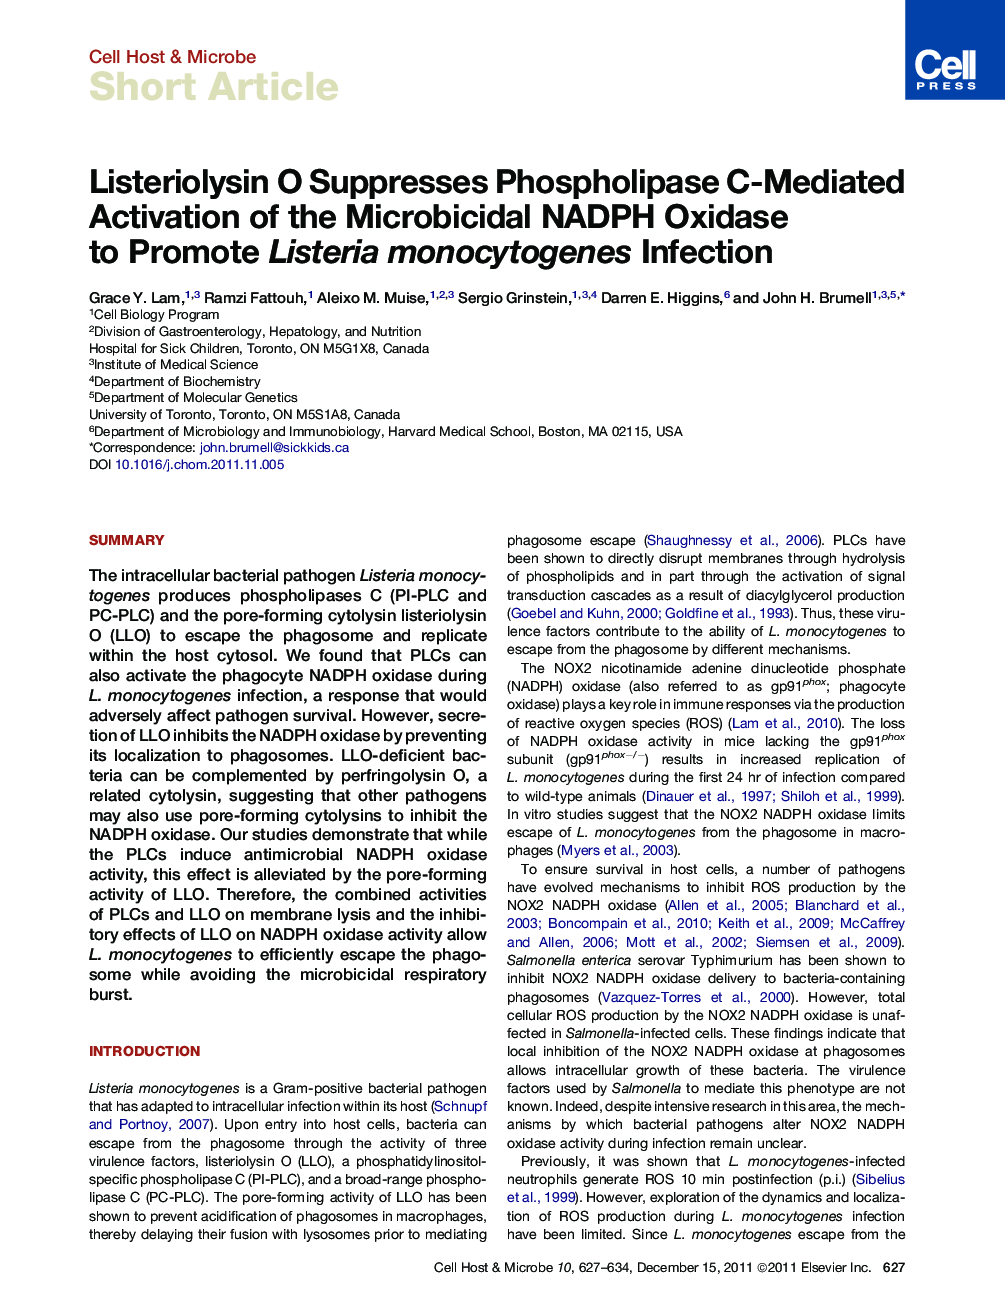 Listeriolysin O Suppresses Phospholipase C-Mediated Activation of the Microbicidal NADPH Oxidase to Promote Listeria monocytogenes Infection